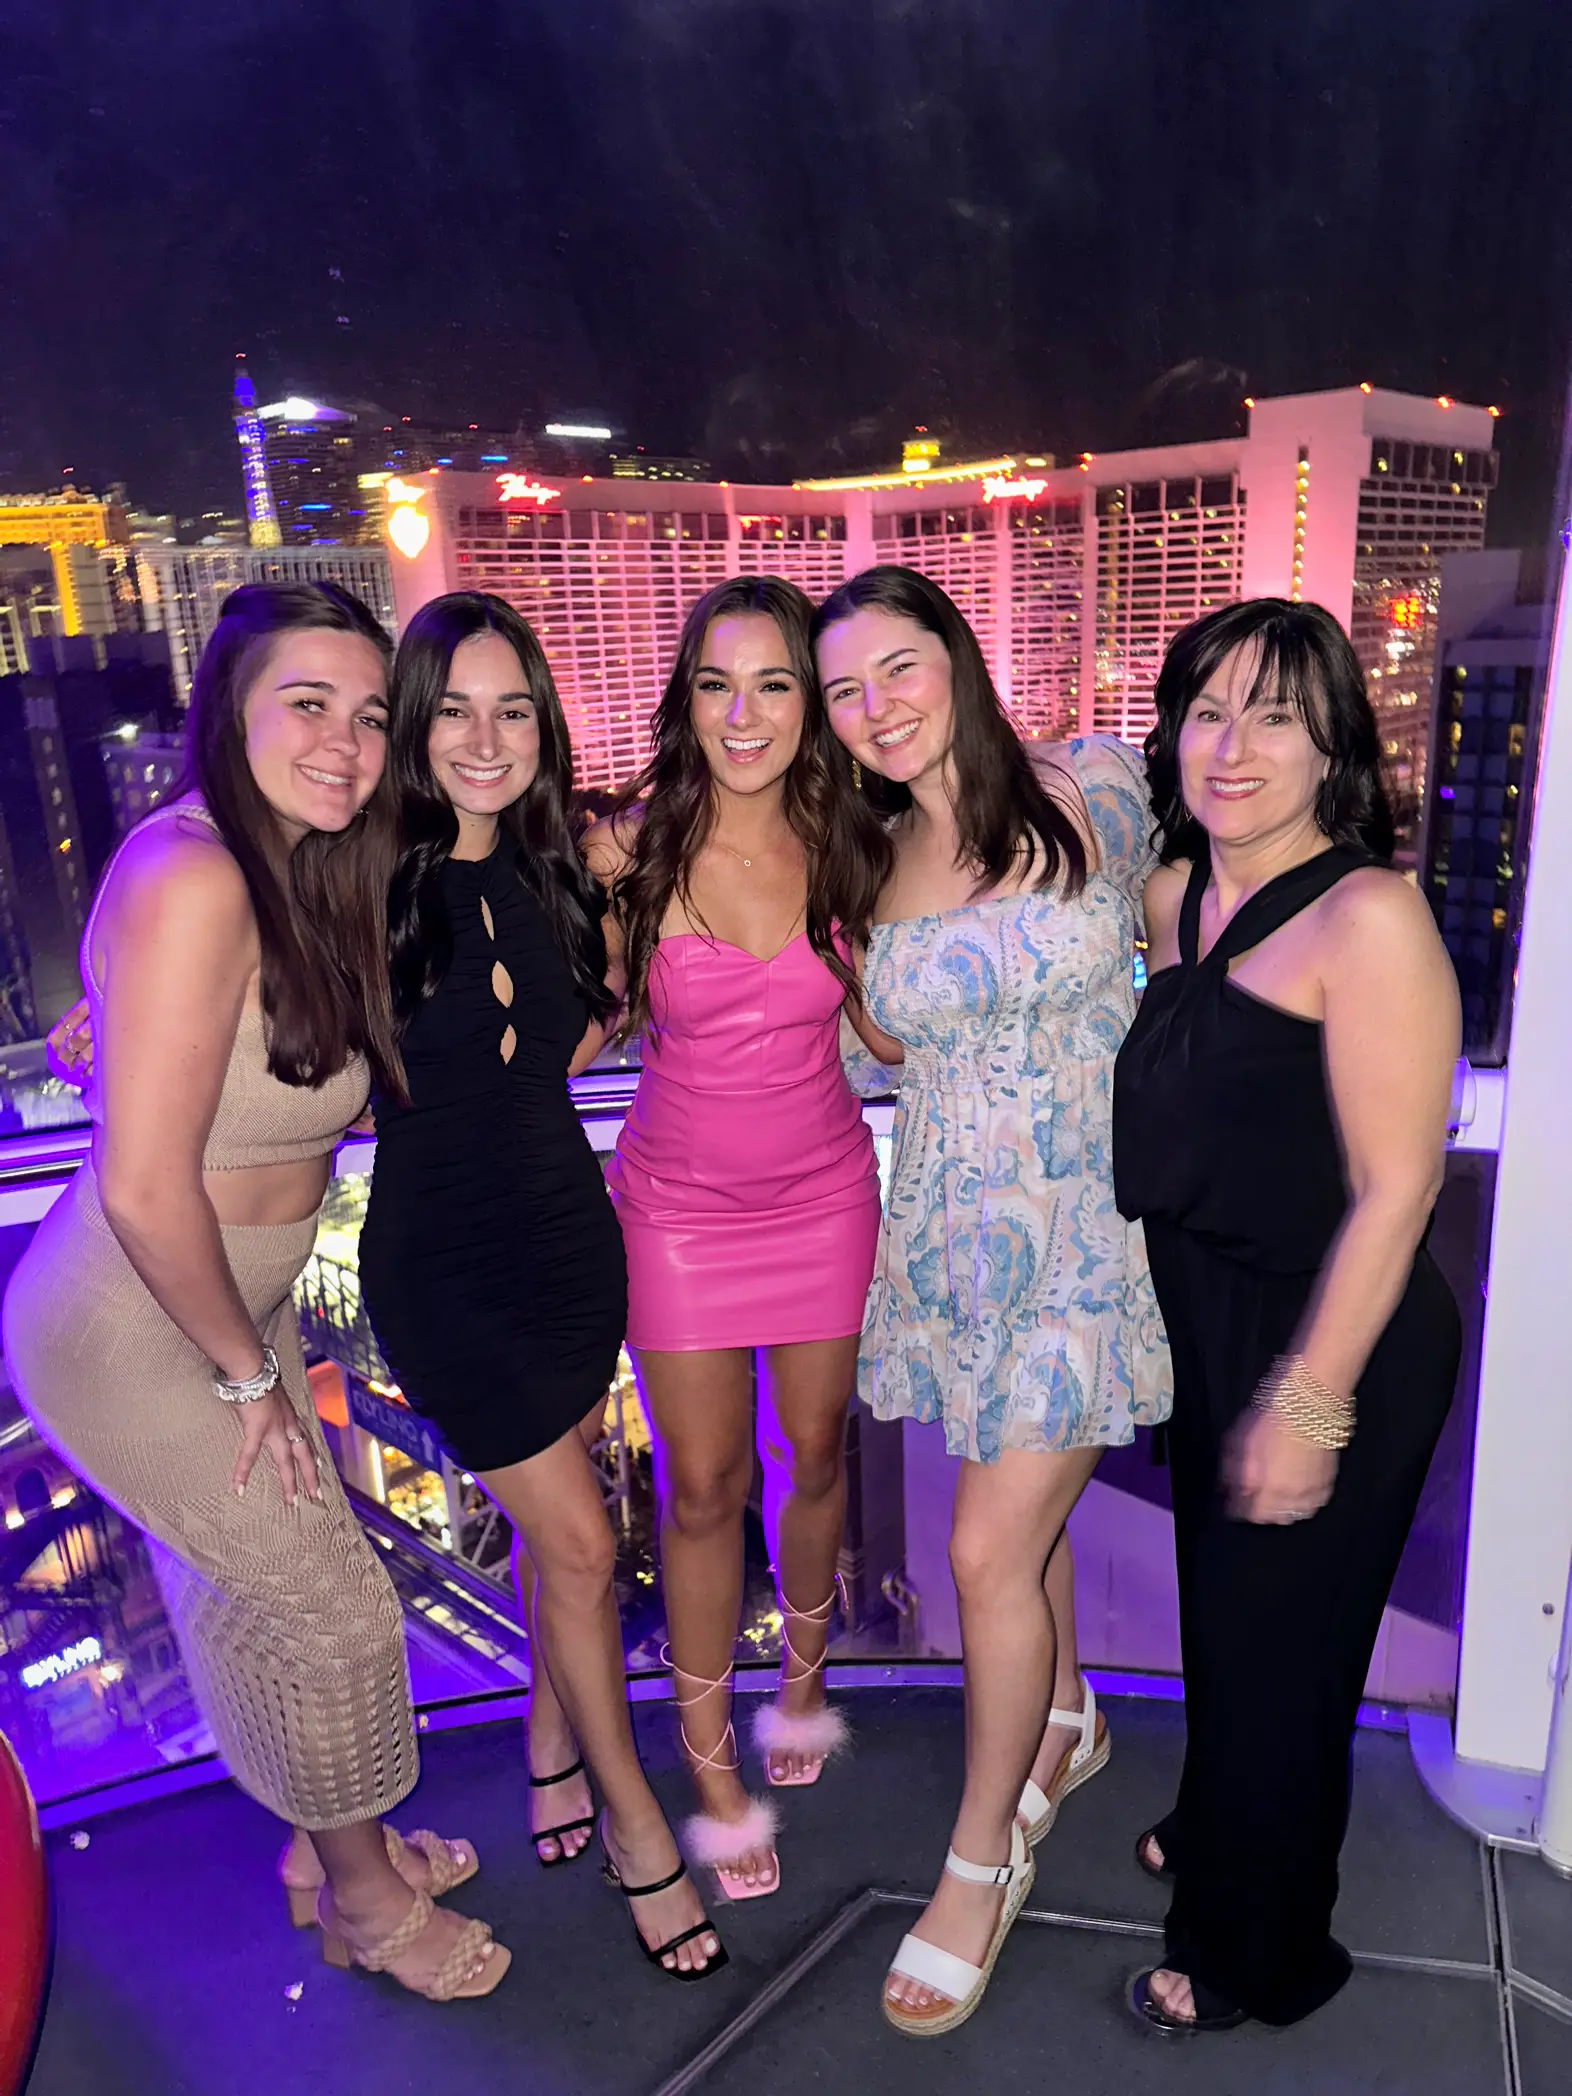 20 top Outfit Ideas for A Family Night Out on The Town in Vegas